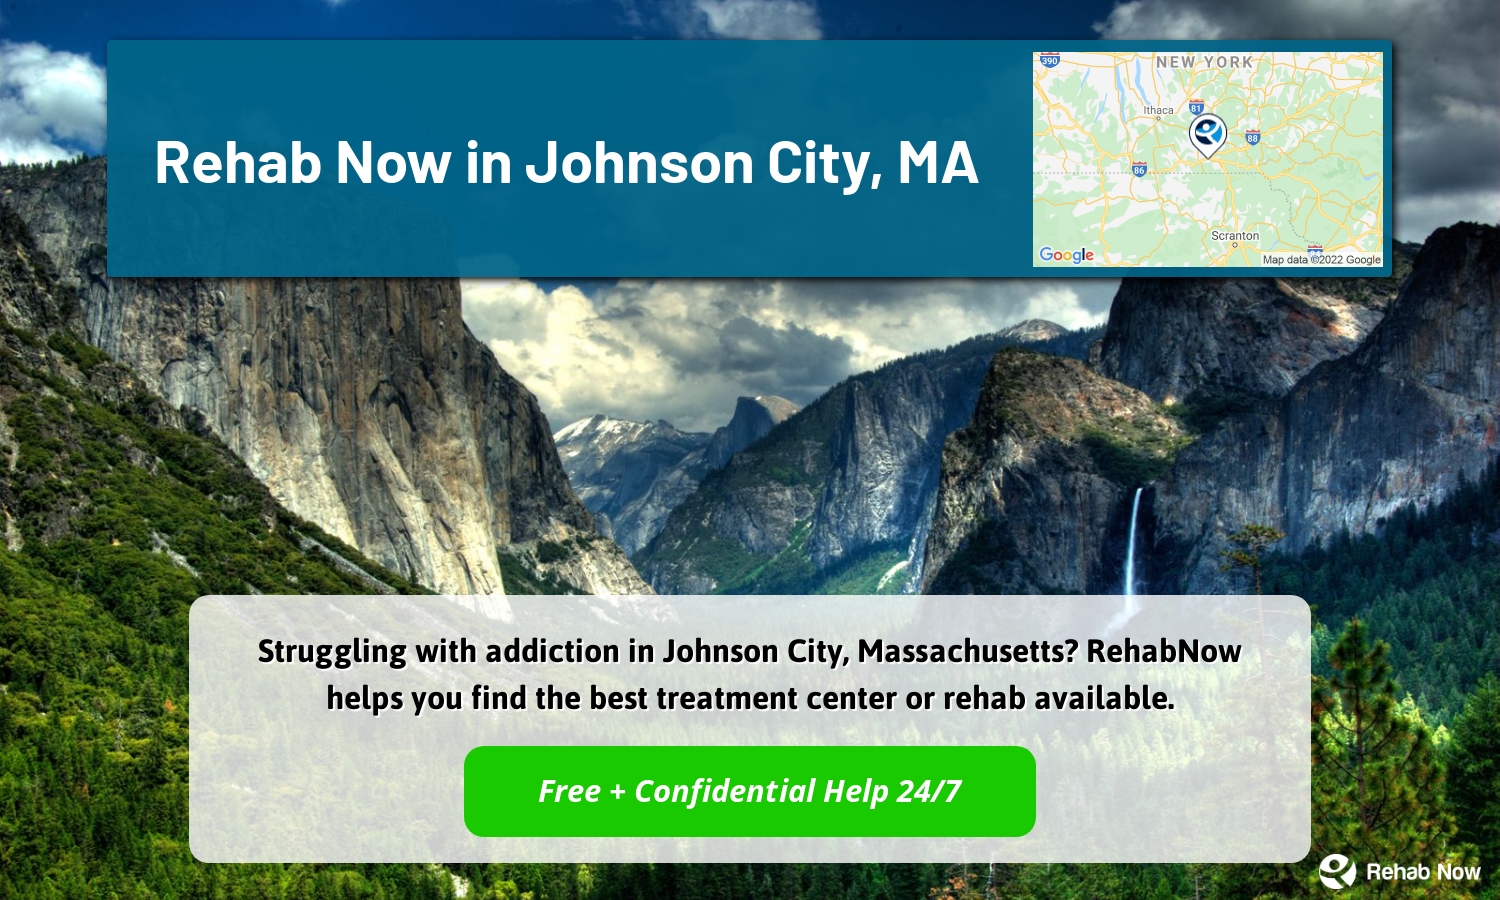 Struggling with addiction in Johnson City, Massachusetts? RehabNow helps you find the best treatment center or rehab available.